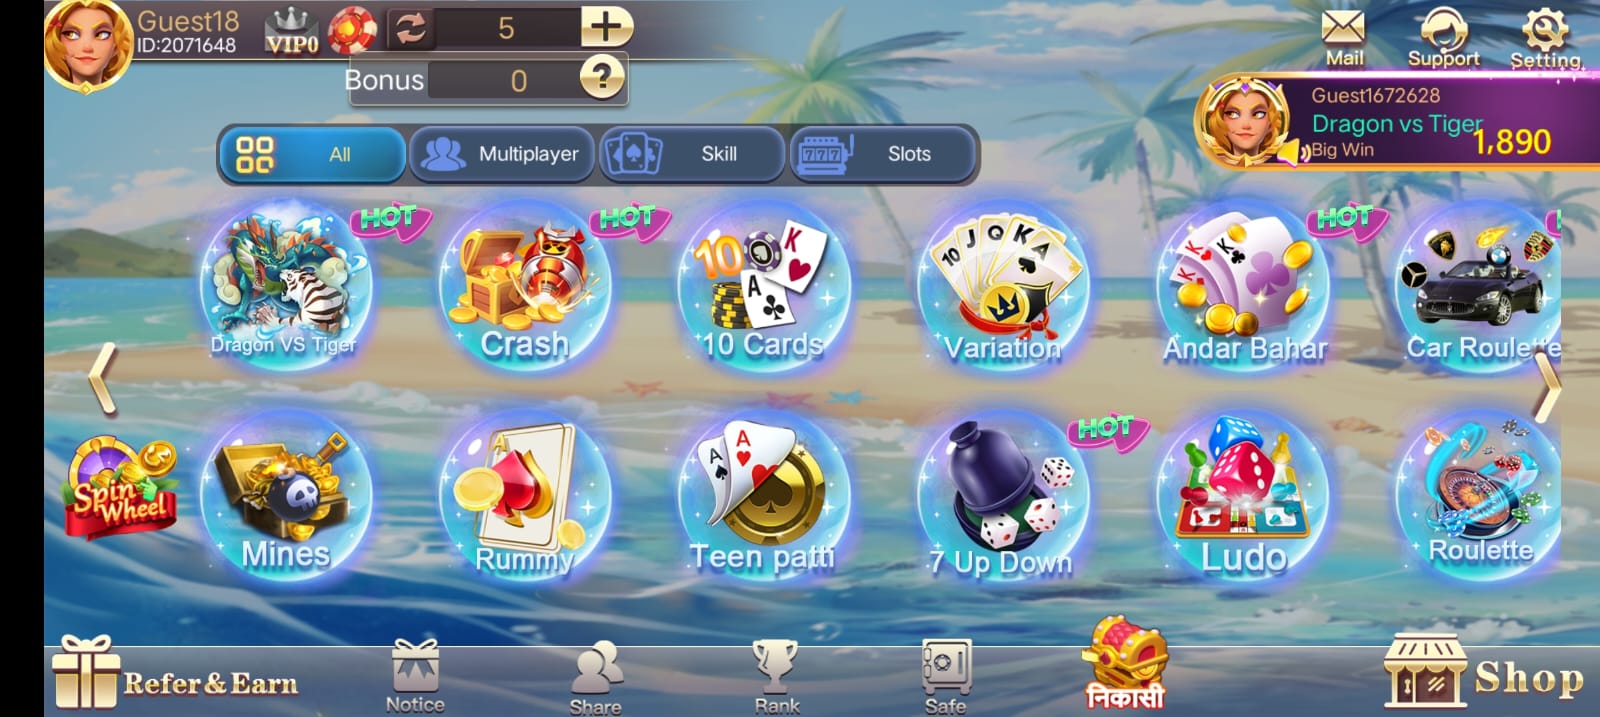 Available Games on Teen Patti One Apk